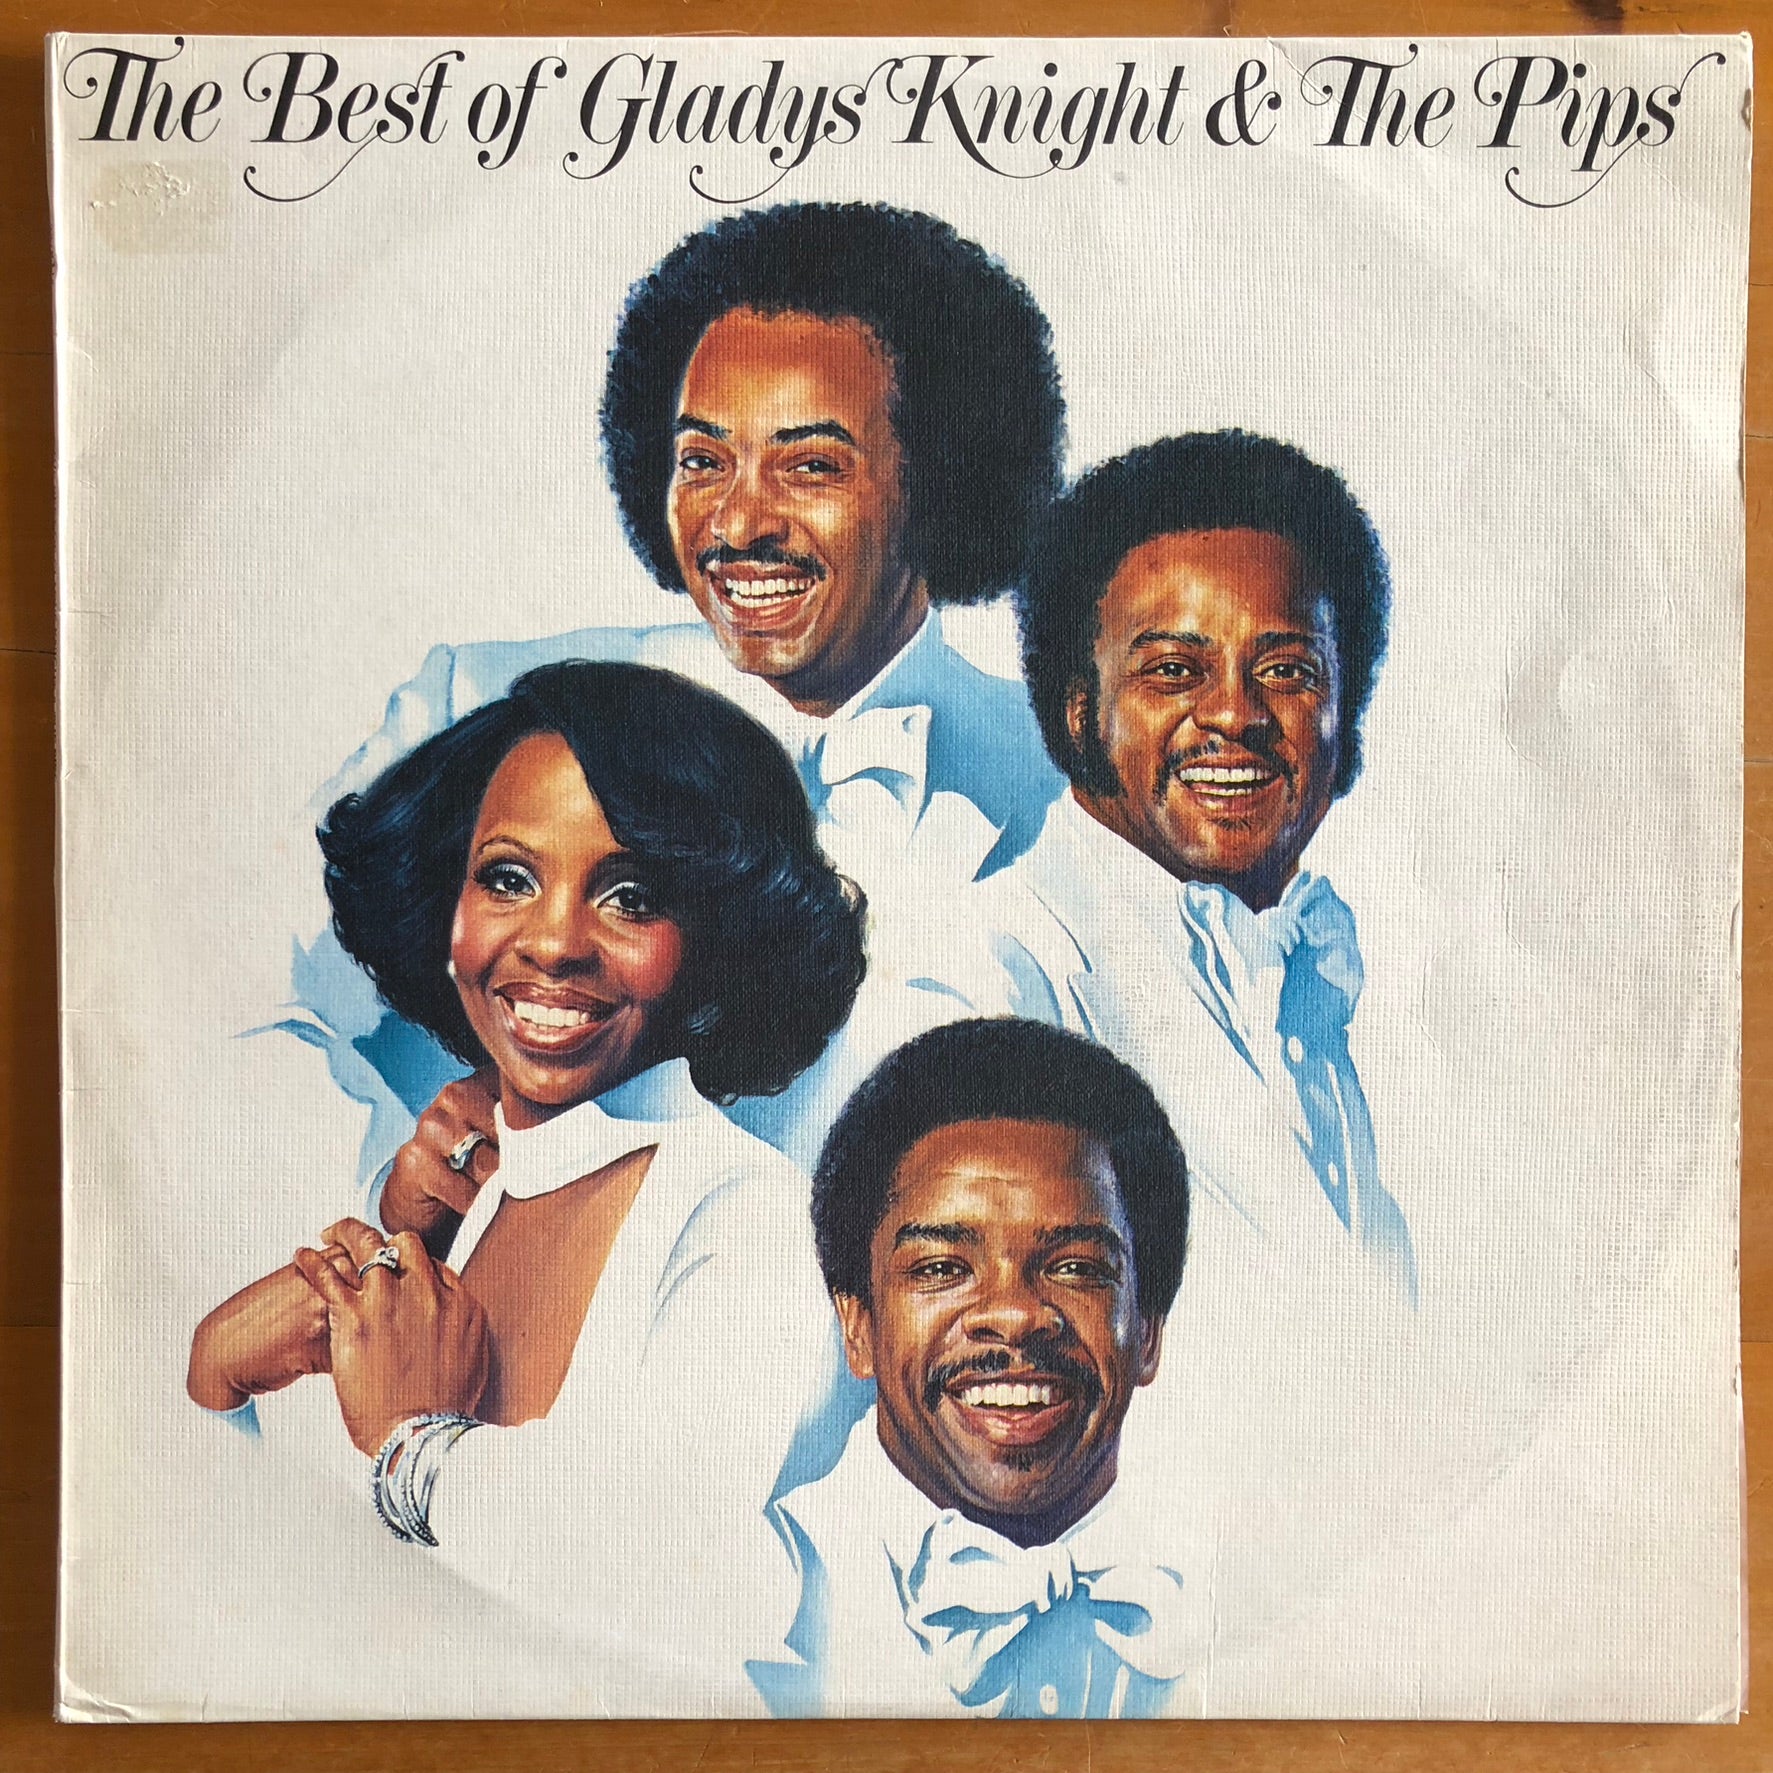 Gladys Knight  The Pips The Best Of Gladys Knight  The Pips –  Suffragette Records